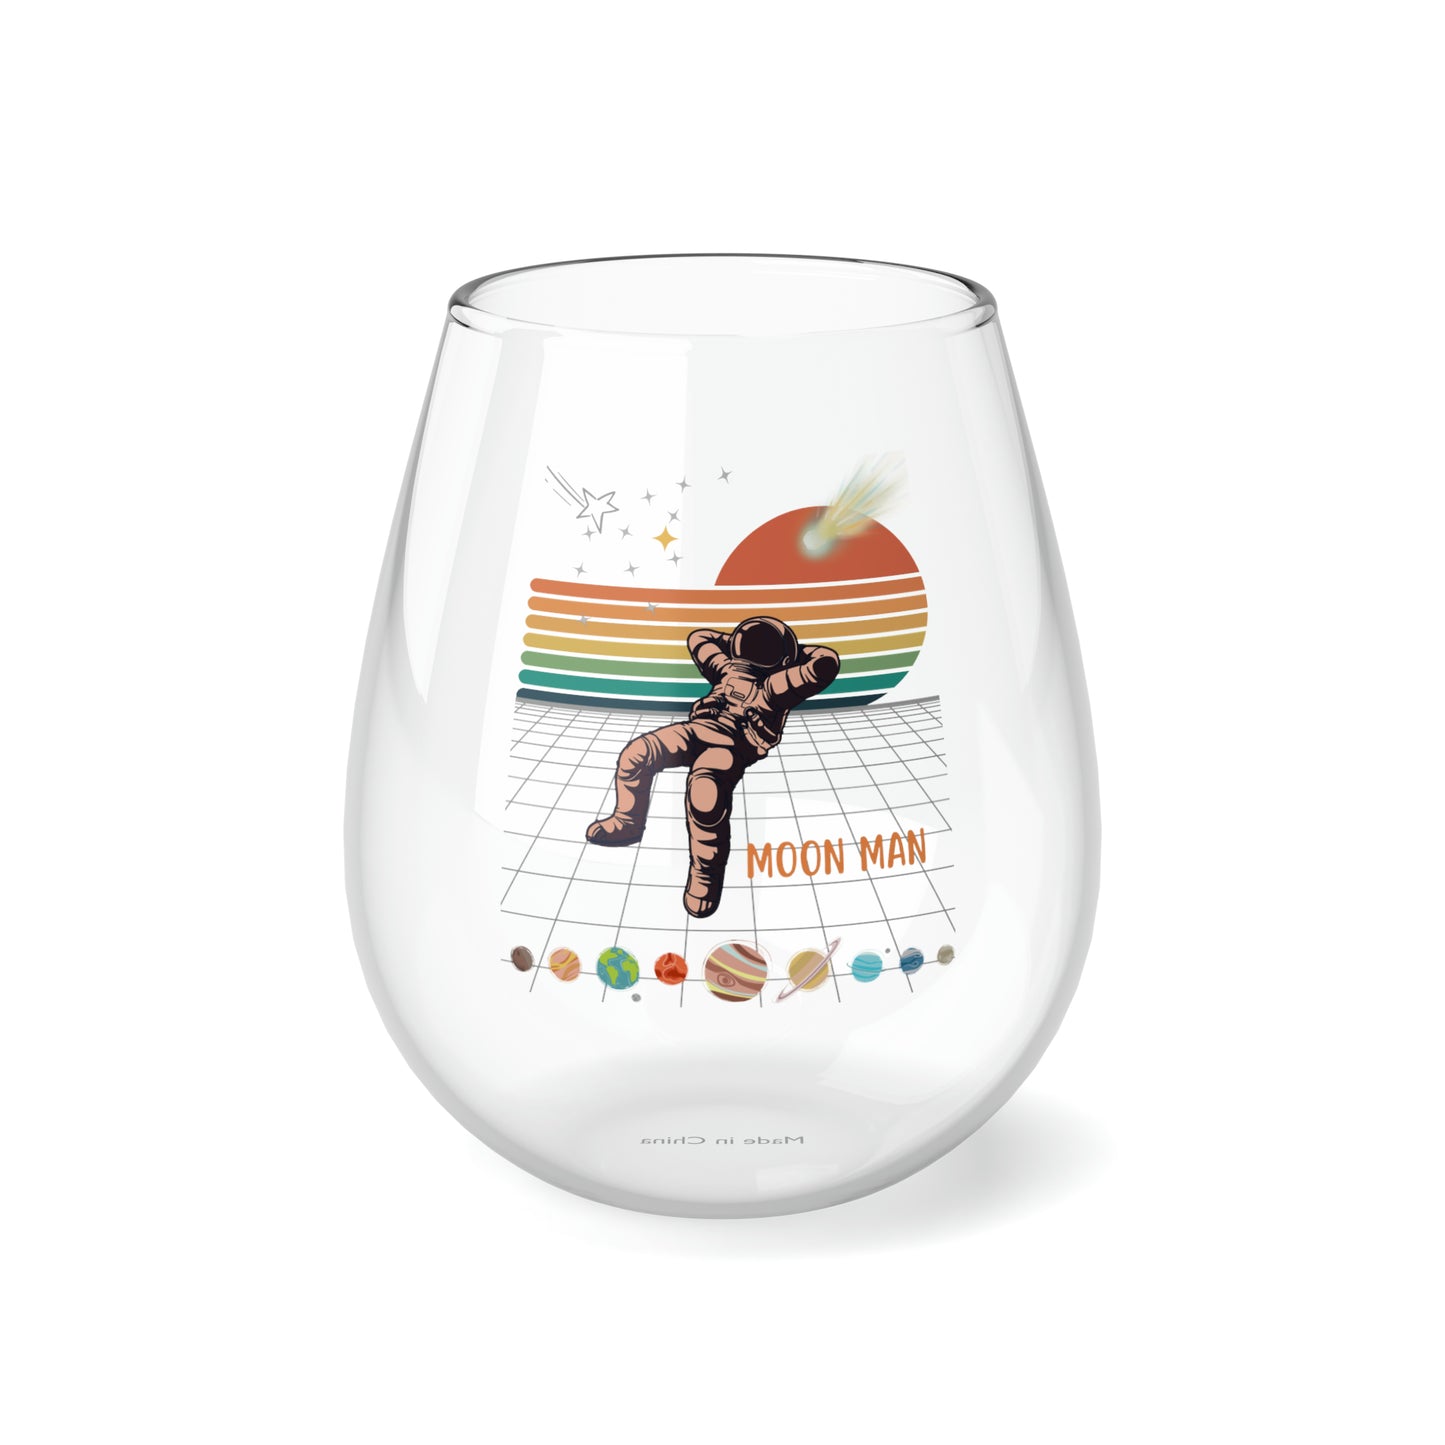 Astronaut Wine Glass, Moon Man Wine Glass, Astronaut Stemless Wine Glass, Outer Space Geekery Wine Glass, Man in Space Suit Retro Glass Gift